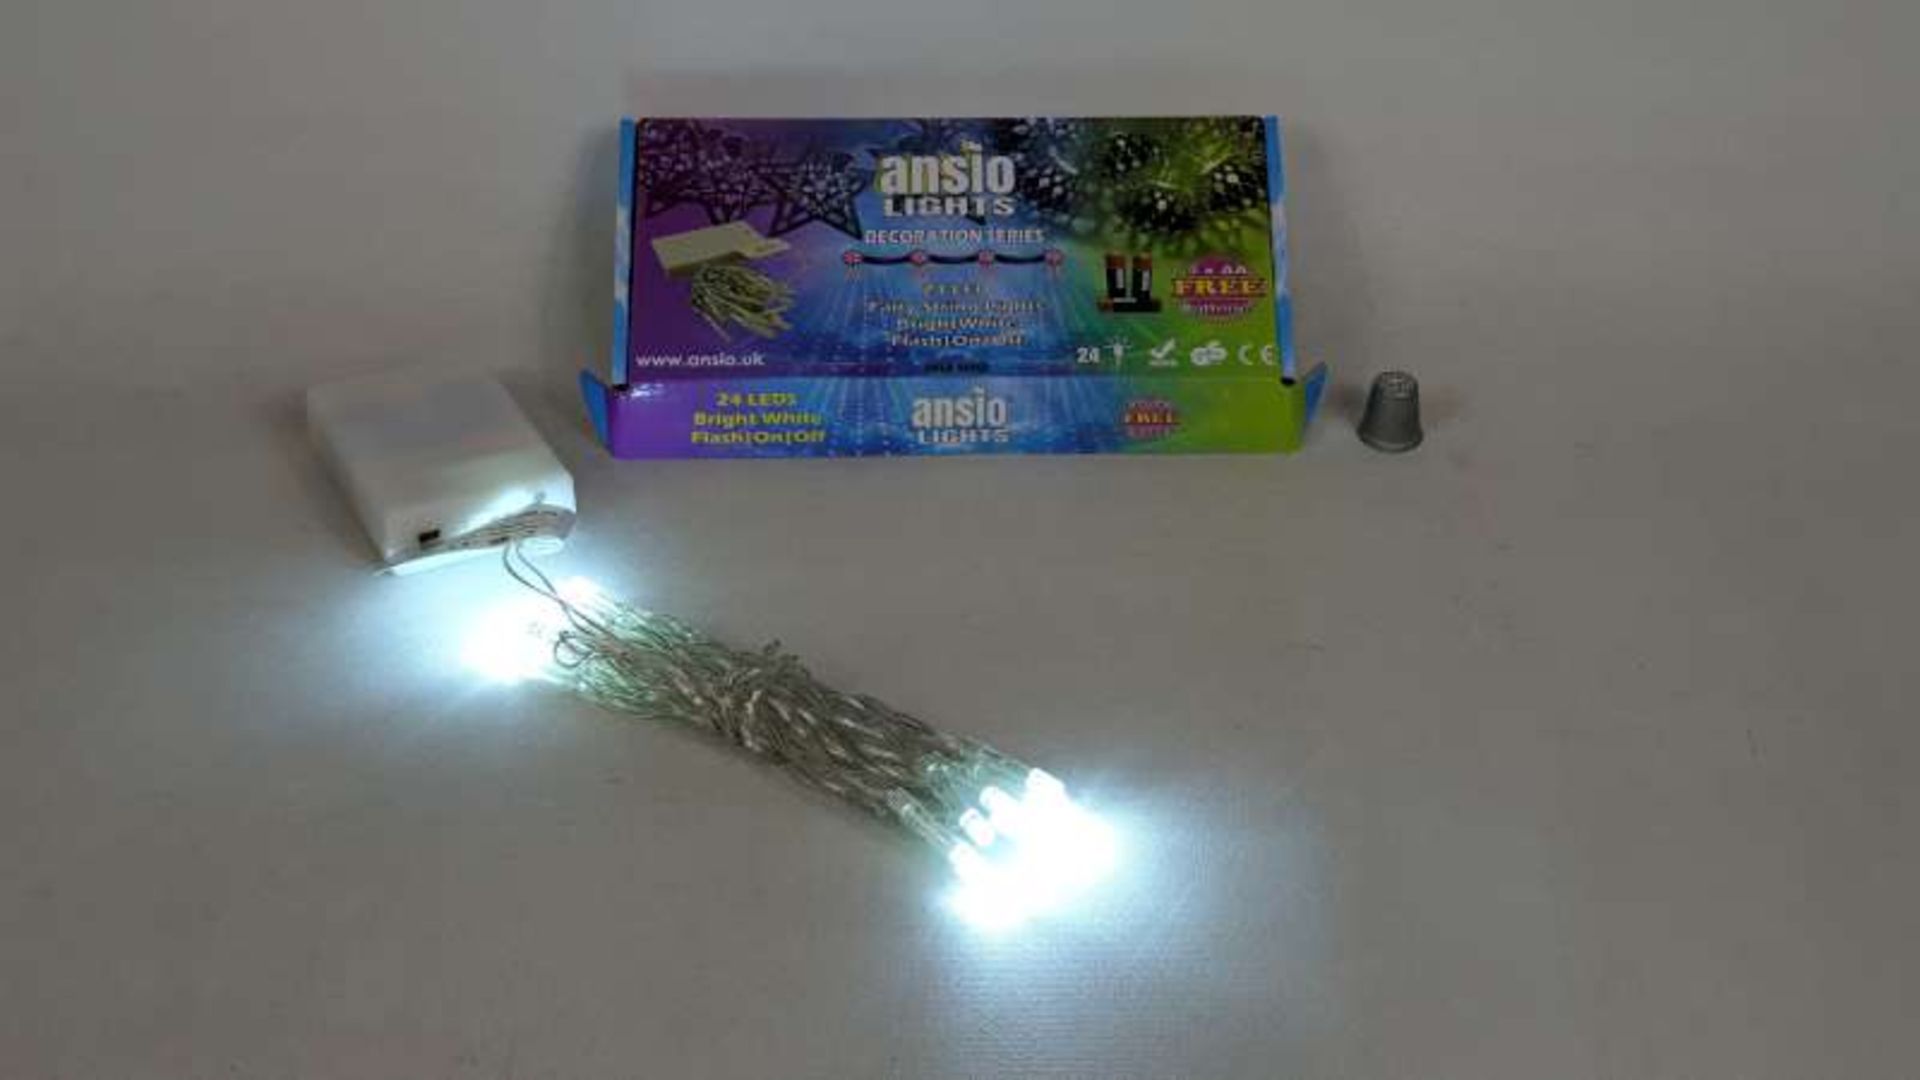 60 X BRAND NEW BOXED 24 LED WARM WHITE CHRISTMAS BATTERY OPERATED STRING FAIRY CHRISTMAS LIGHTS WITH